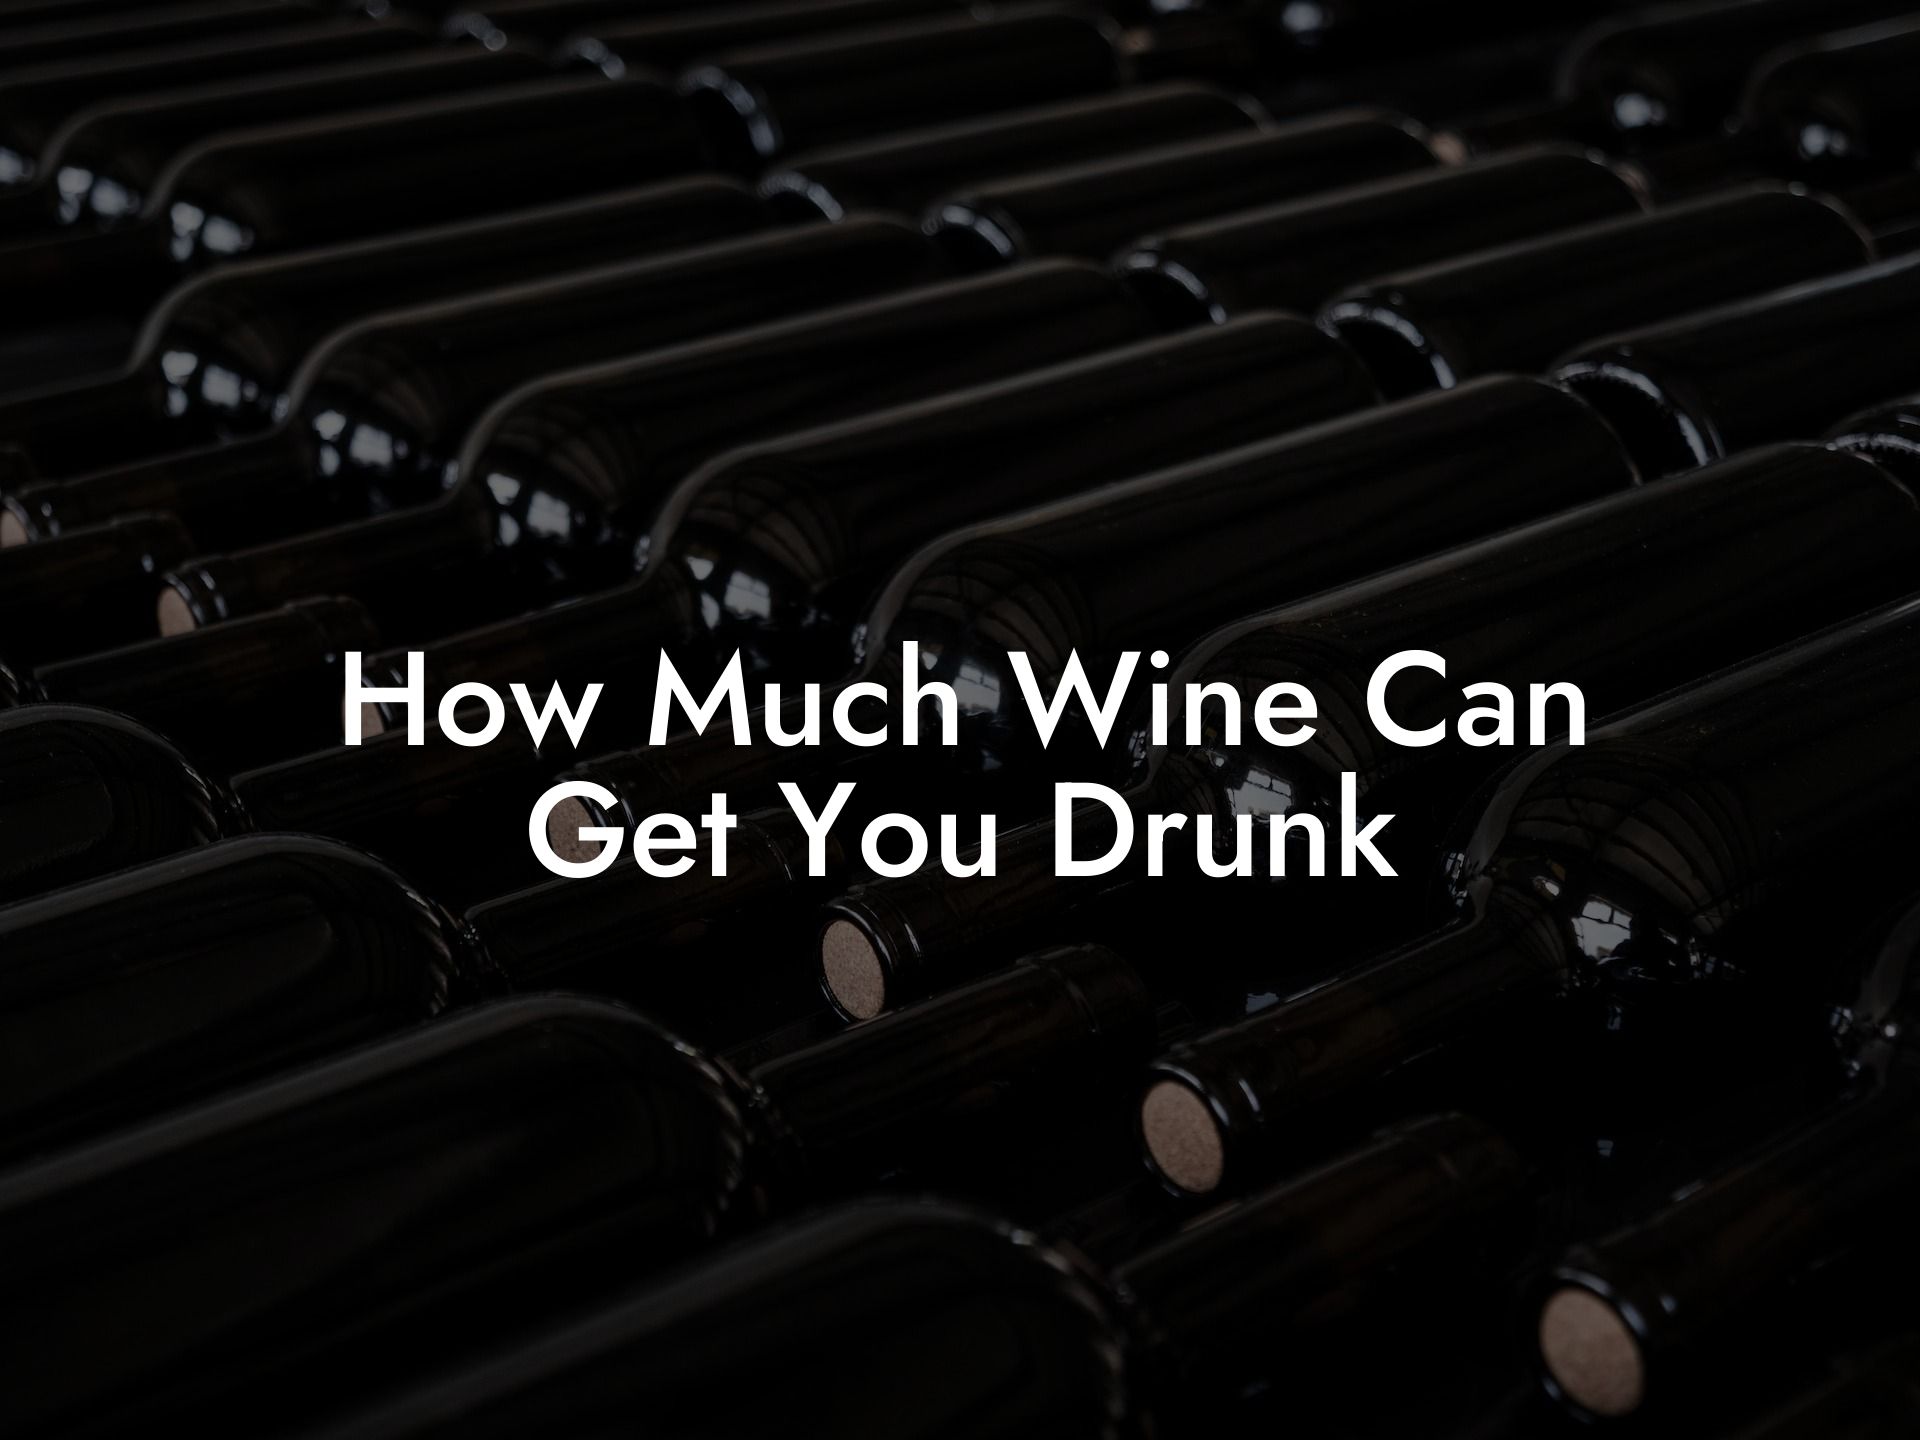 How Much Wine Can Get You Drunk